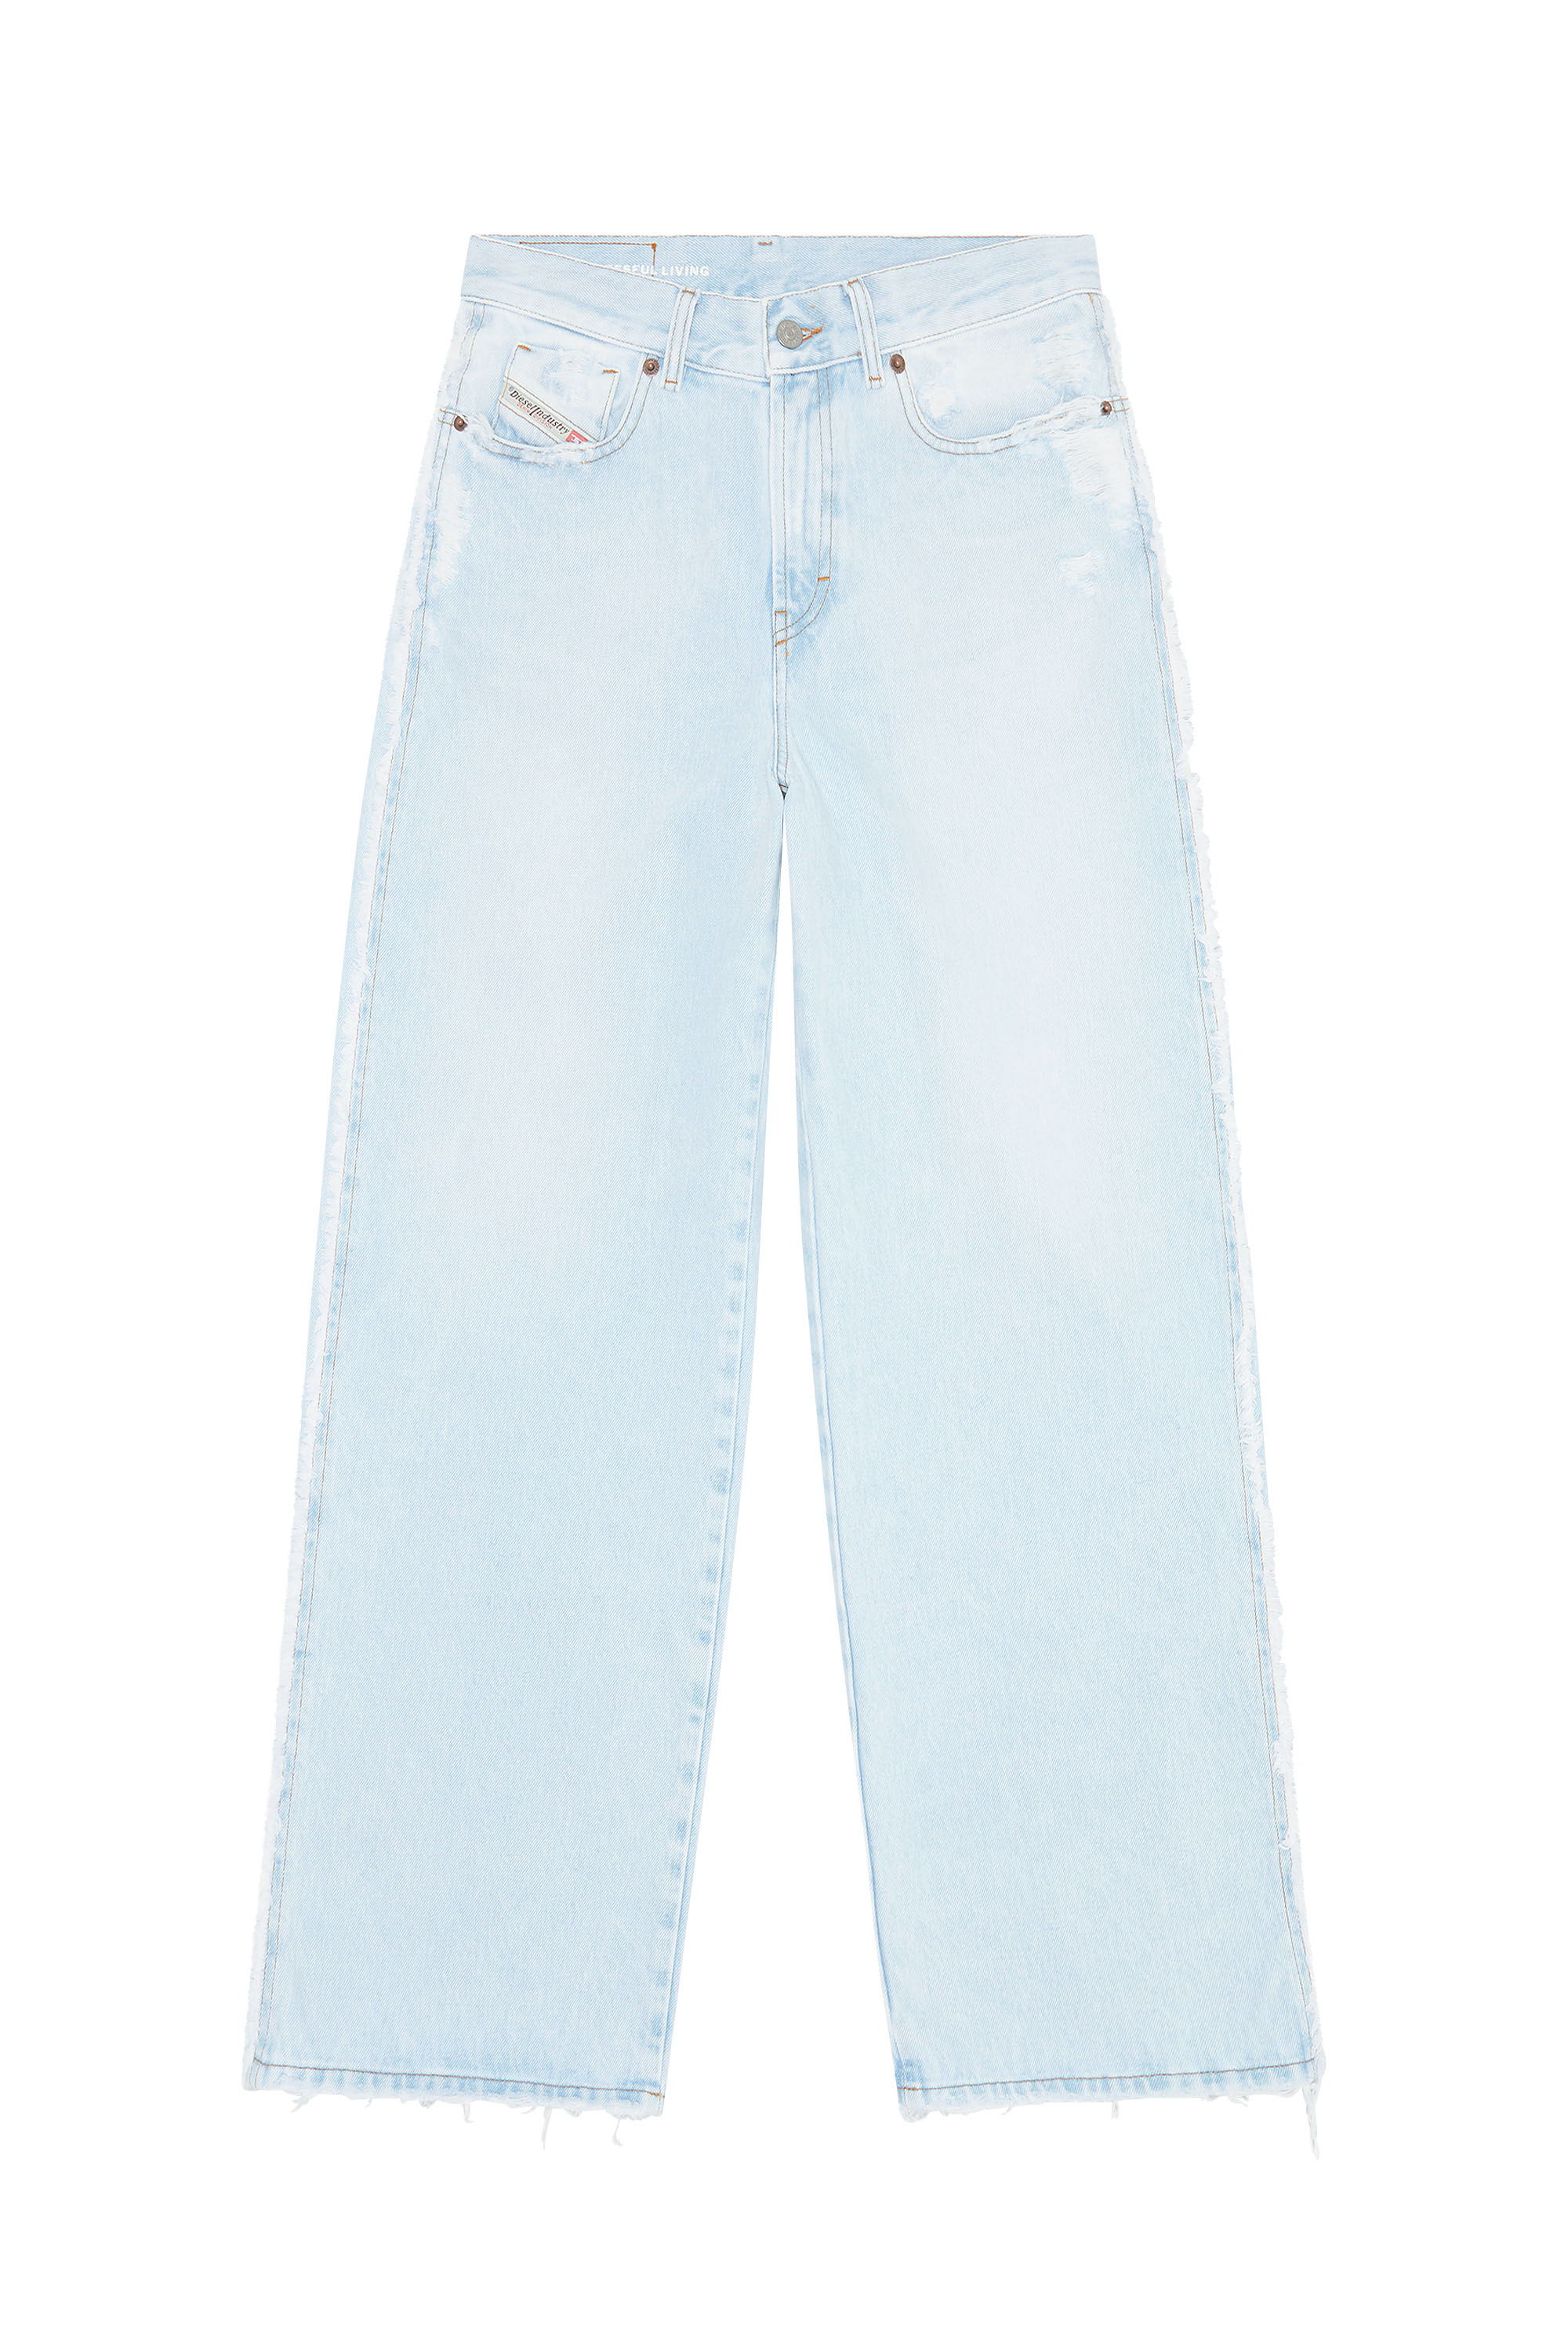 2000 Widee 007M7 Bootcut and Flare Jeans, Light Blue - Jeans